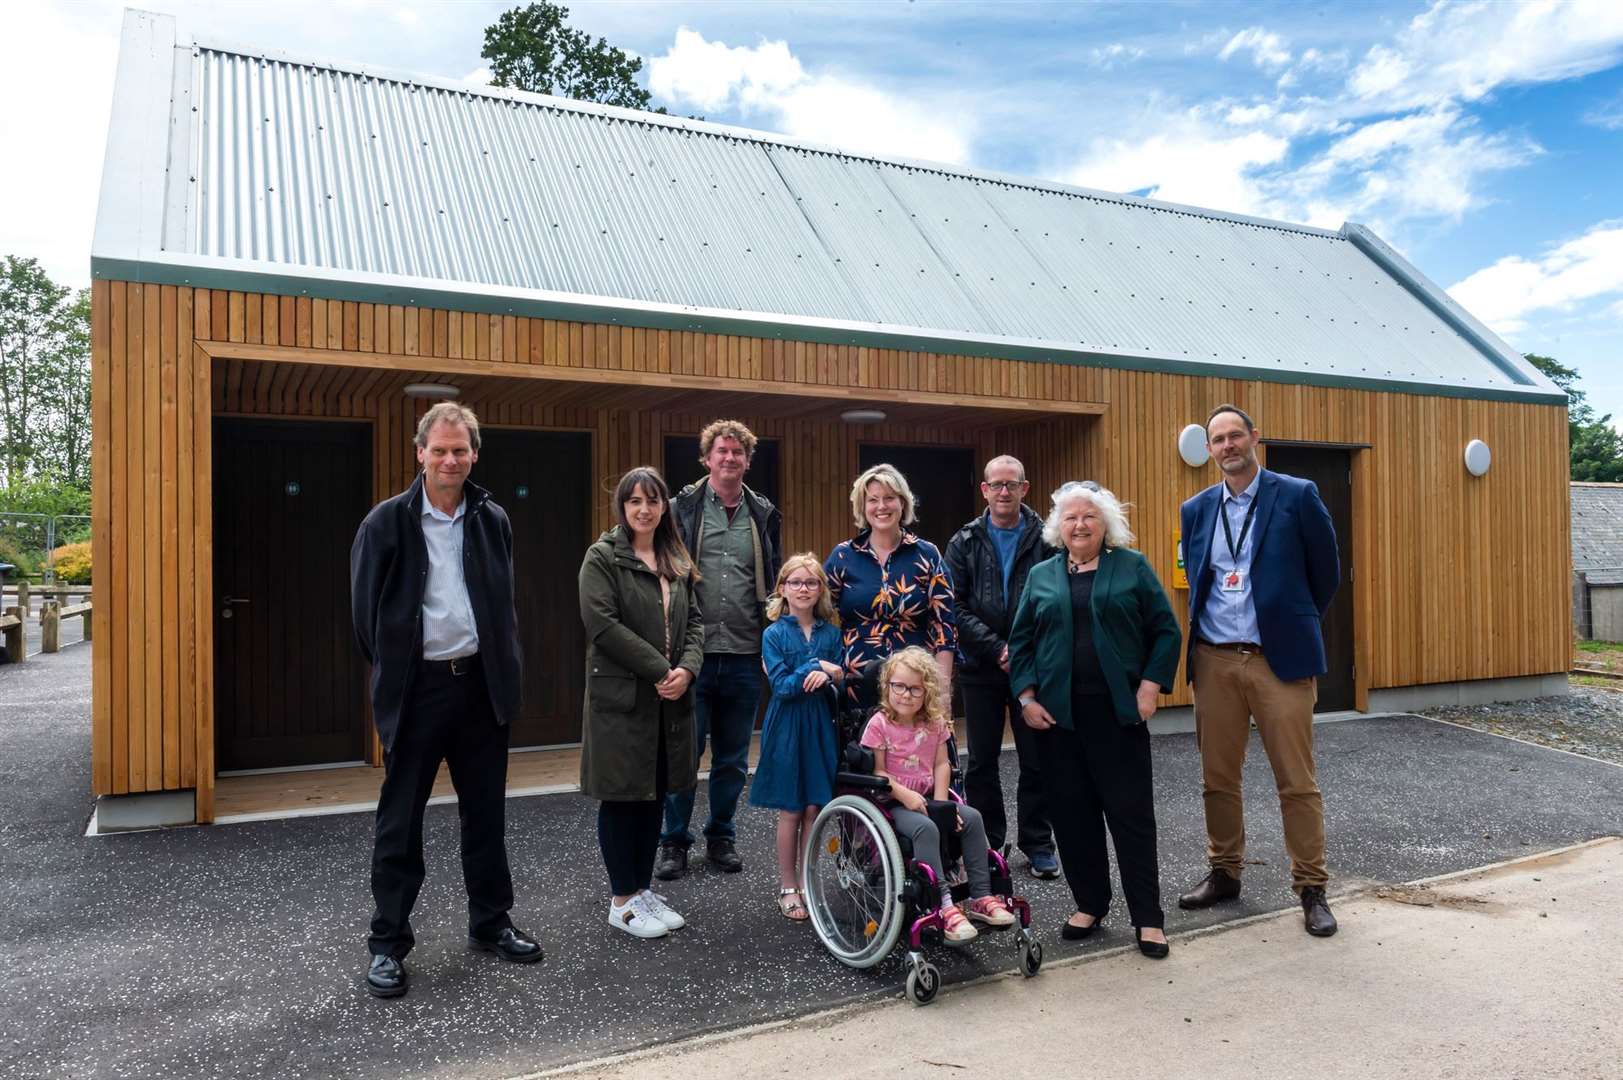 Pictured at the new Changing Places accessible toilets at Aden Country Park are (from left) Cllr David Mair, Cllr Hannah Powell, Neil Shirran, Aden Project Co-ordinator, Donna-May Clauson with Sophia and Zara-May Clauson, Cllr Geoff Crowson, Cllr Anne Simpson and David Jackson, Regional Director at VisitScotland